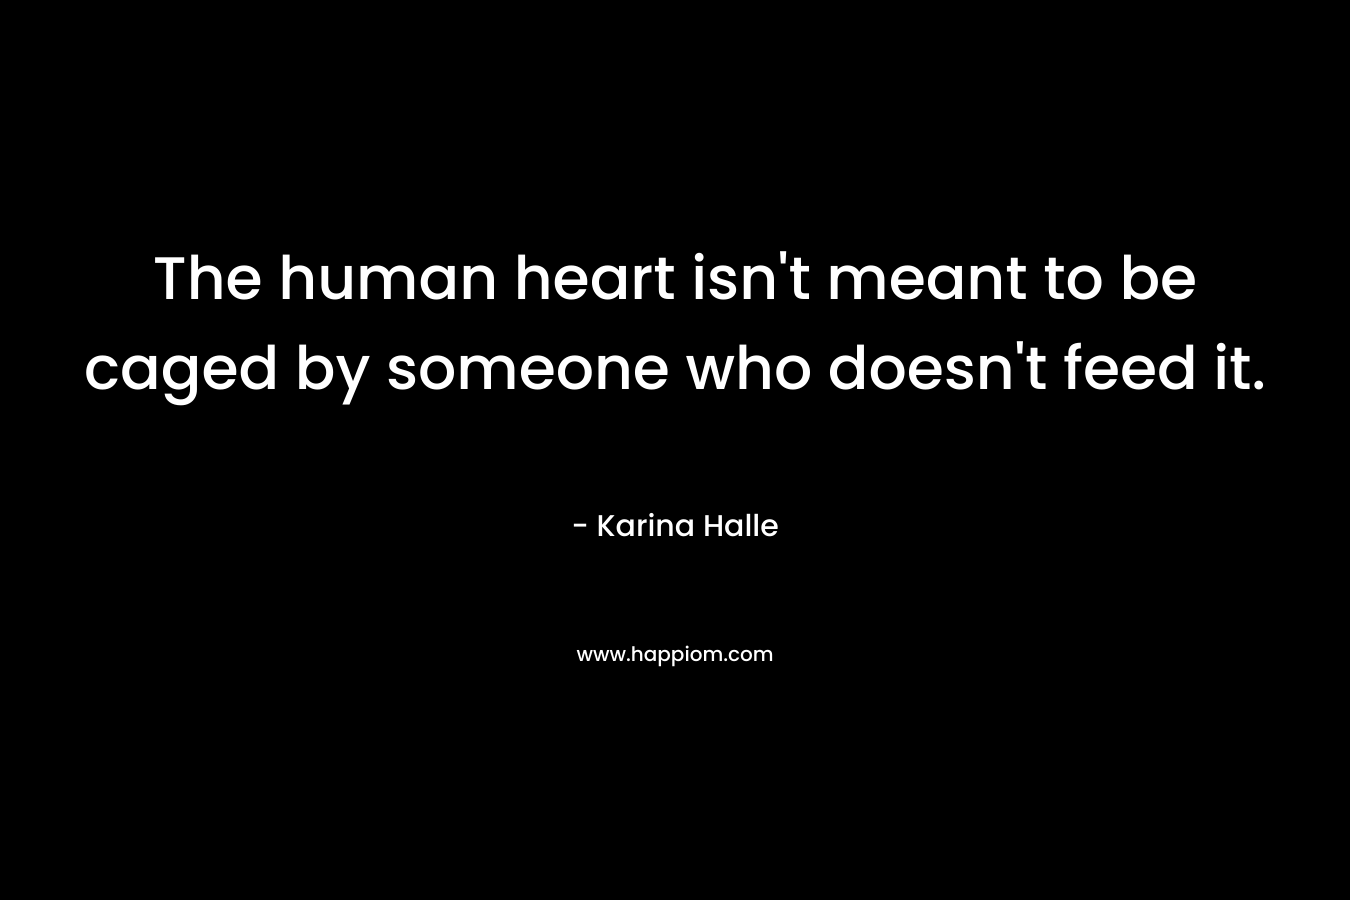 The human heart isn't meant to be caged by someone who doesn't feed it.